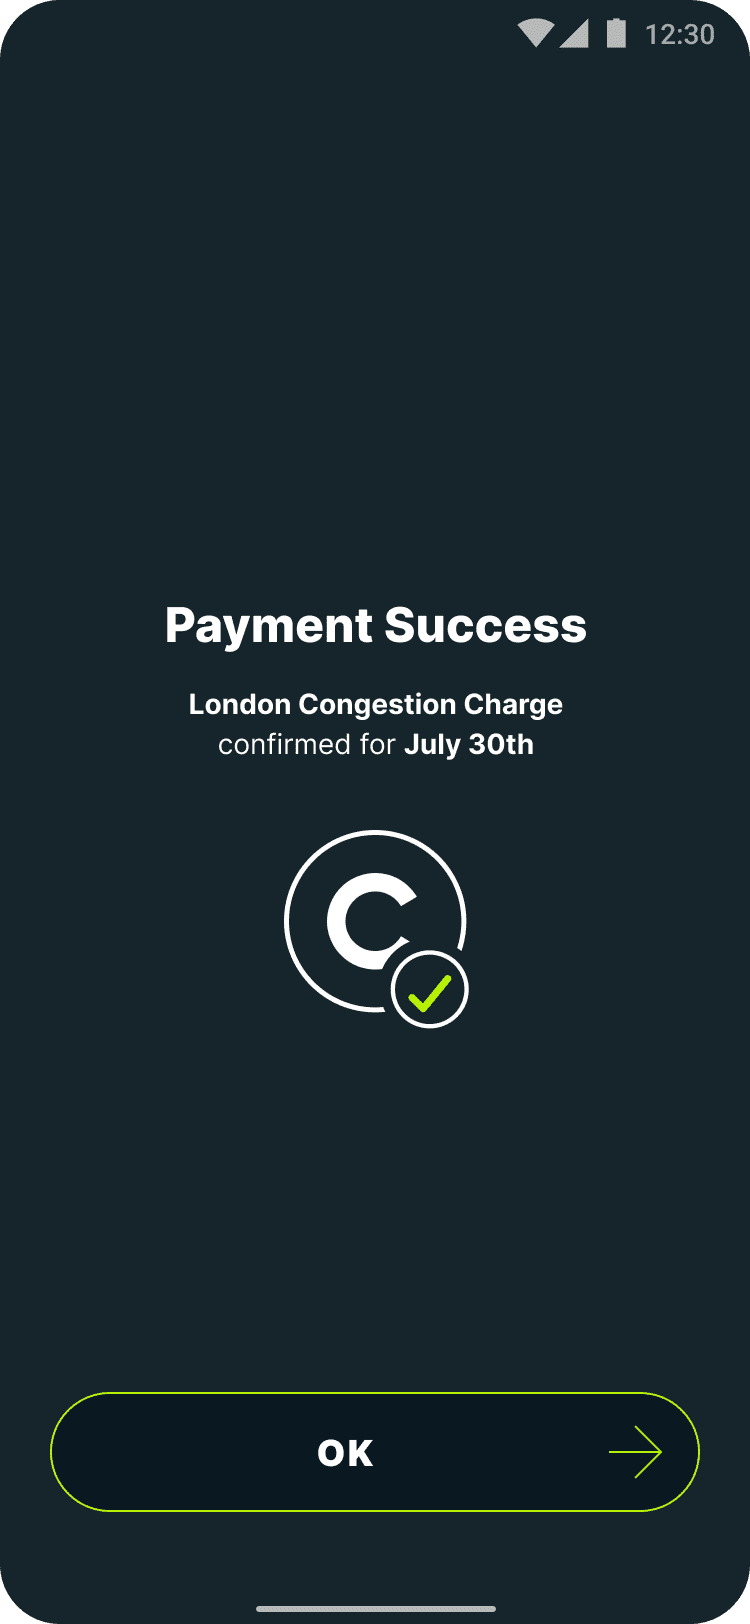 Payment success screen for the London Congestion Charge in Caura